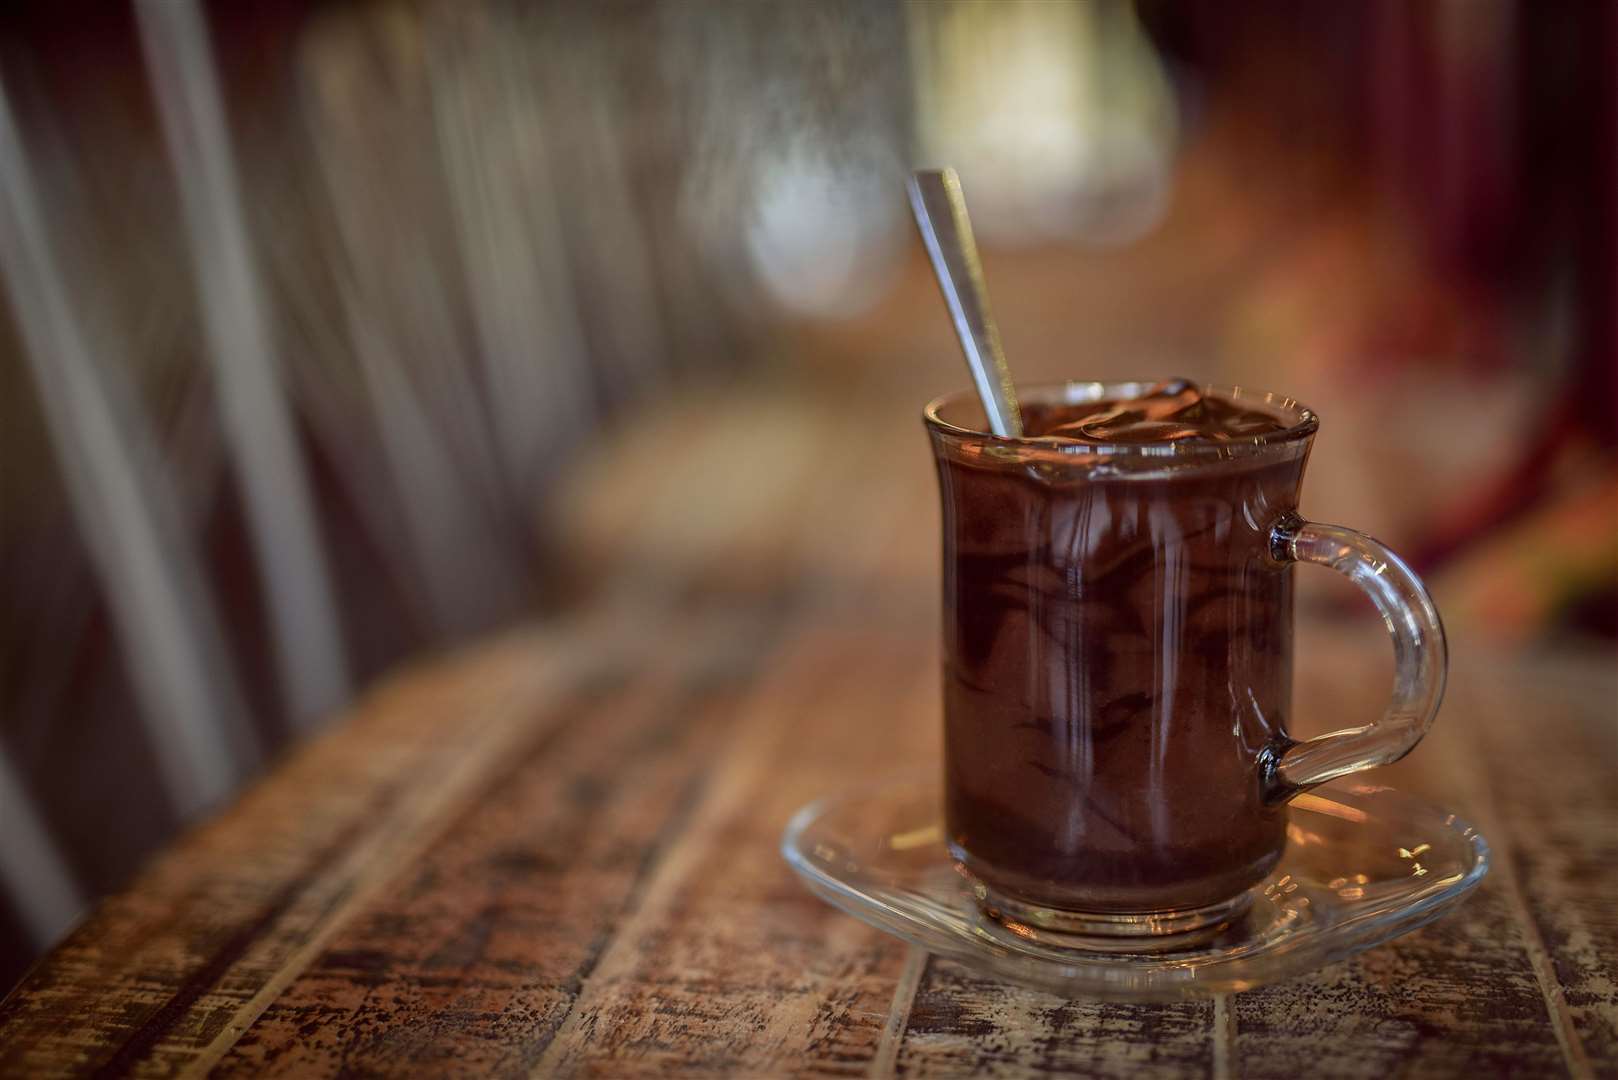 There are endless recipes and combinations to taste chocolate. Photo by Polina Tankilevitch from Pexels.